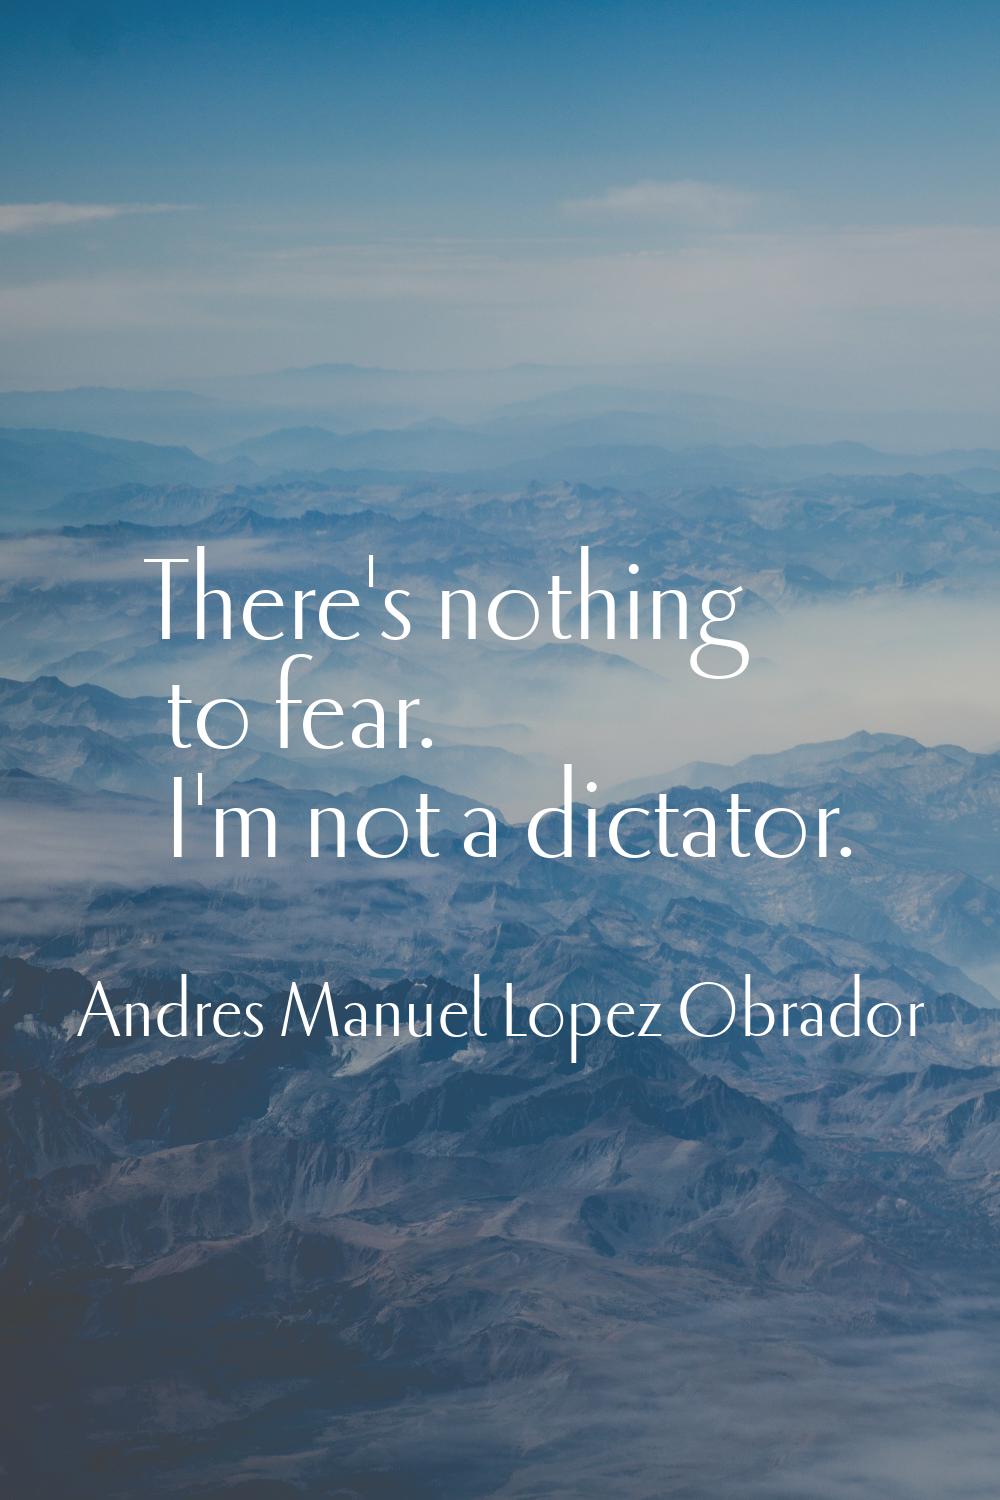 There's nothing to fear. I'm not a dictator.